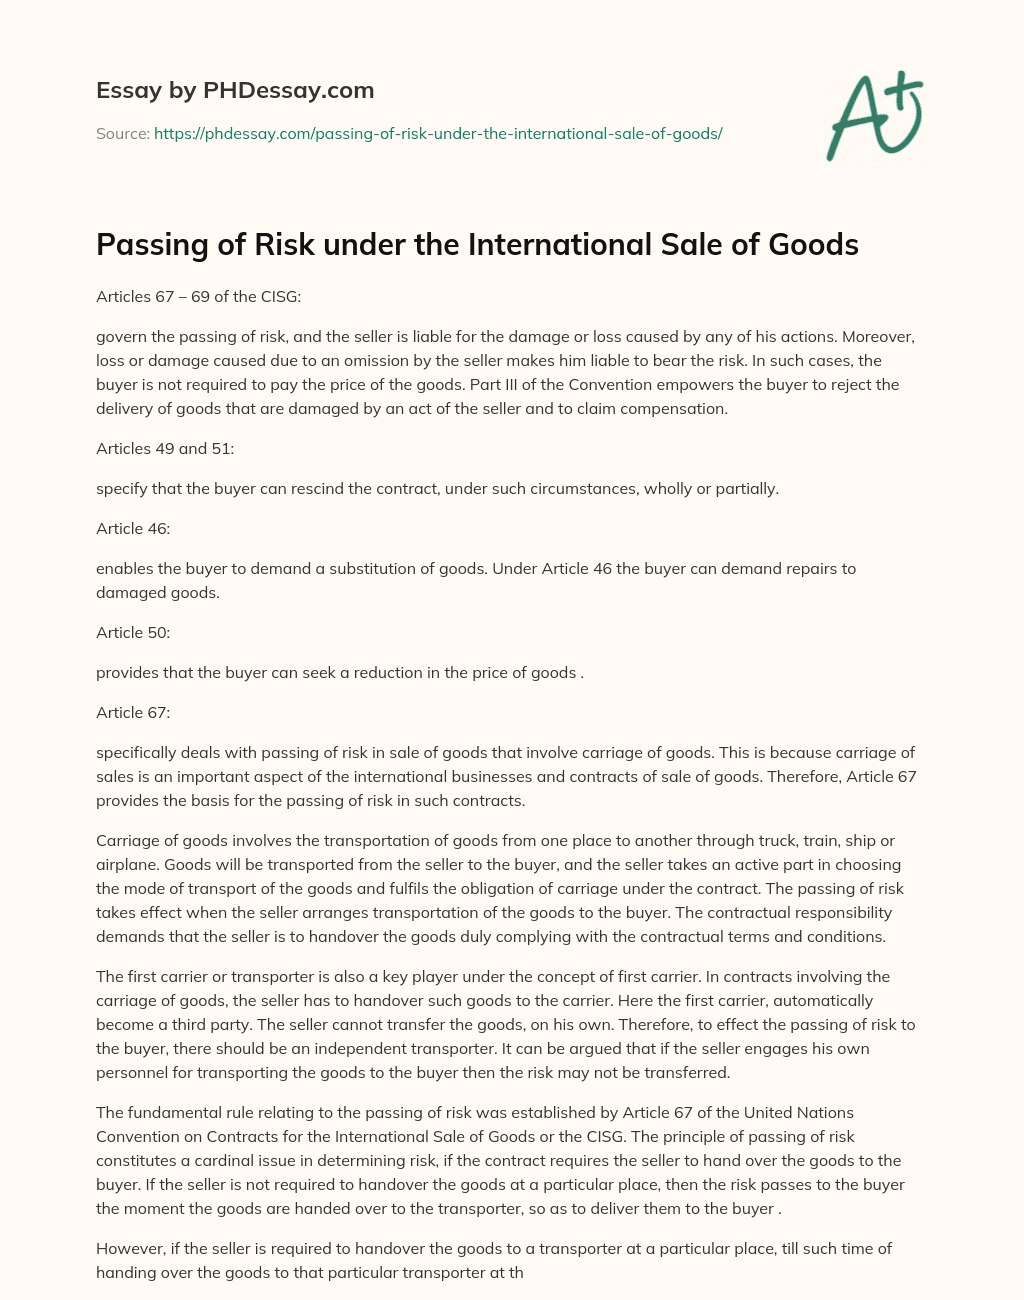 Passing of Risk under the International Sale of Goods essay